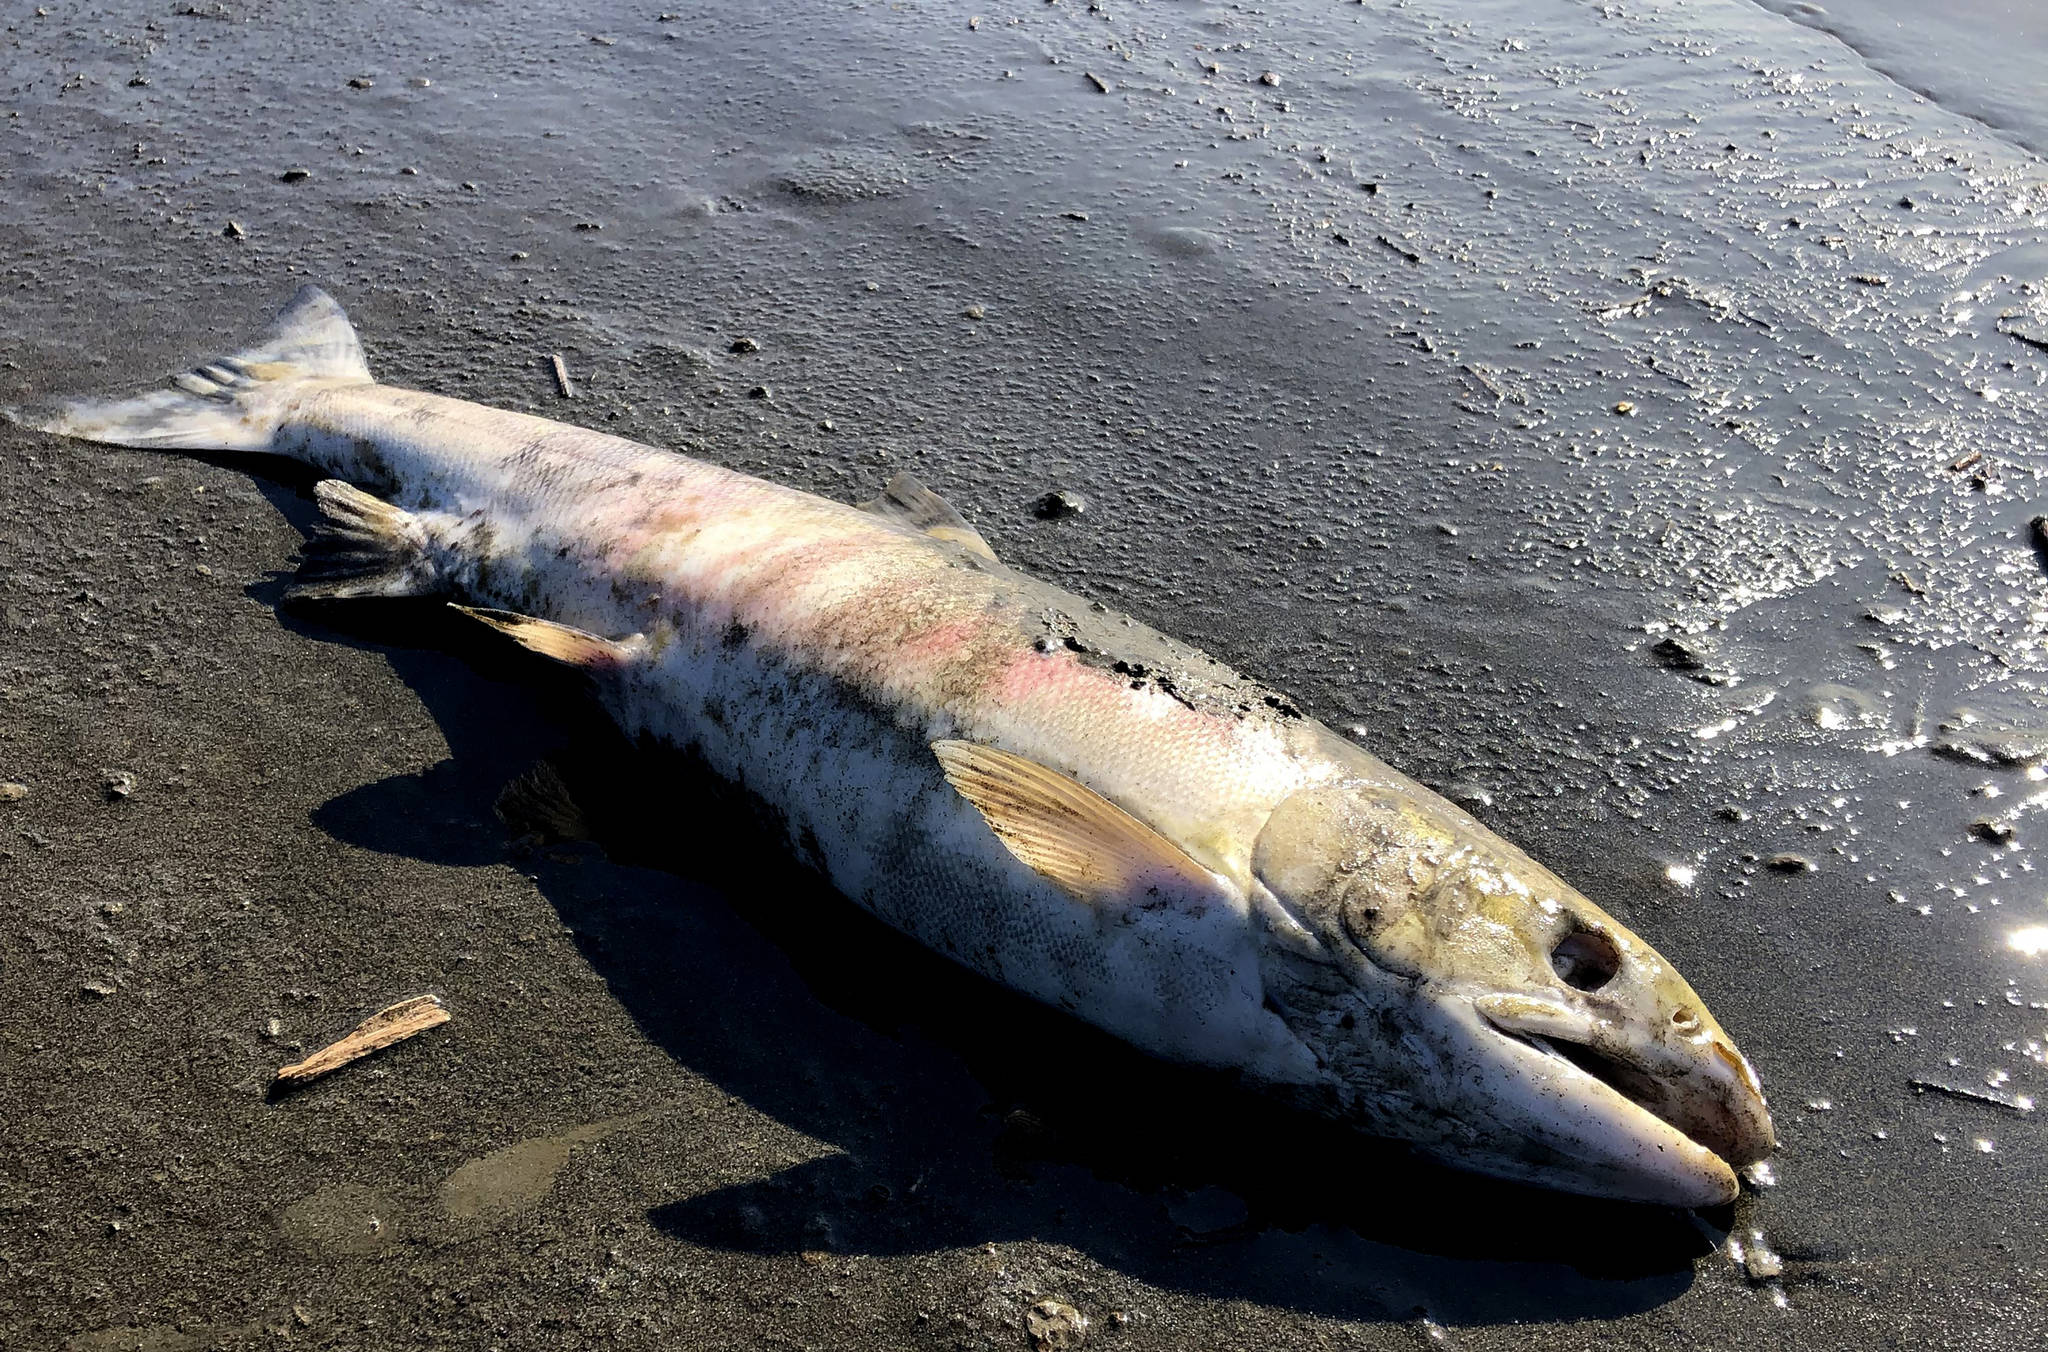 This July 2019 photo provided by Peter Westley shows the carcass of a chum salmon along the shore of the Koyukuk River near Huslia, Alaska, July 2019 was the hottest month ever recorded in the state. Global warming looks like it will be a far bigger problem for the world’s fish species than scientists first thought, since a study led by Dr. Flemming Dahlke released on Thursday, July 2, 2020 shows that when fish are spawning or are embryos they are far more vulnerable to hotter water. (Peter Westley | University of Alaska Fairbanks)